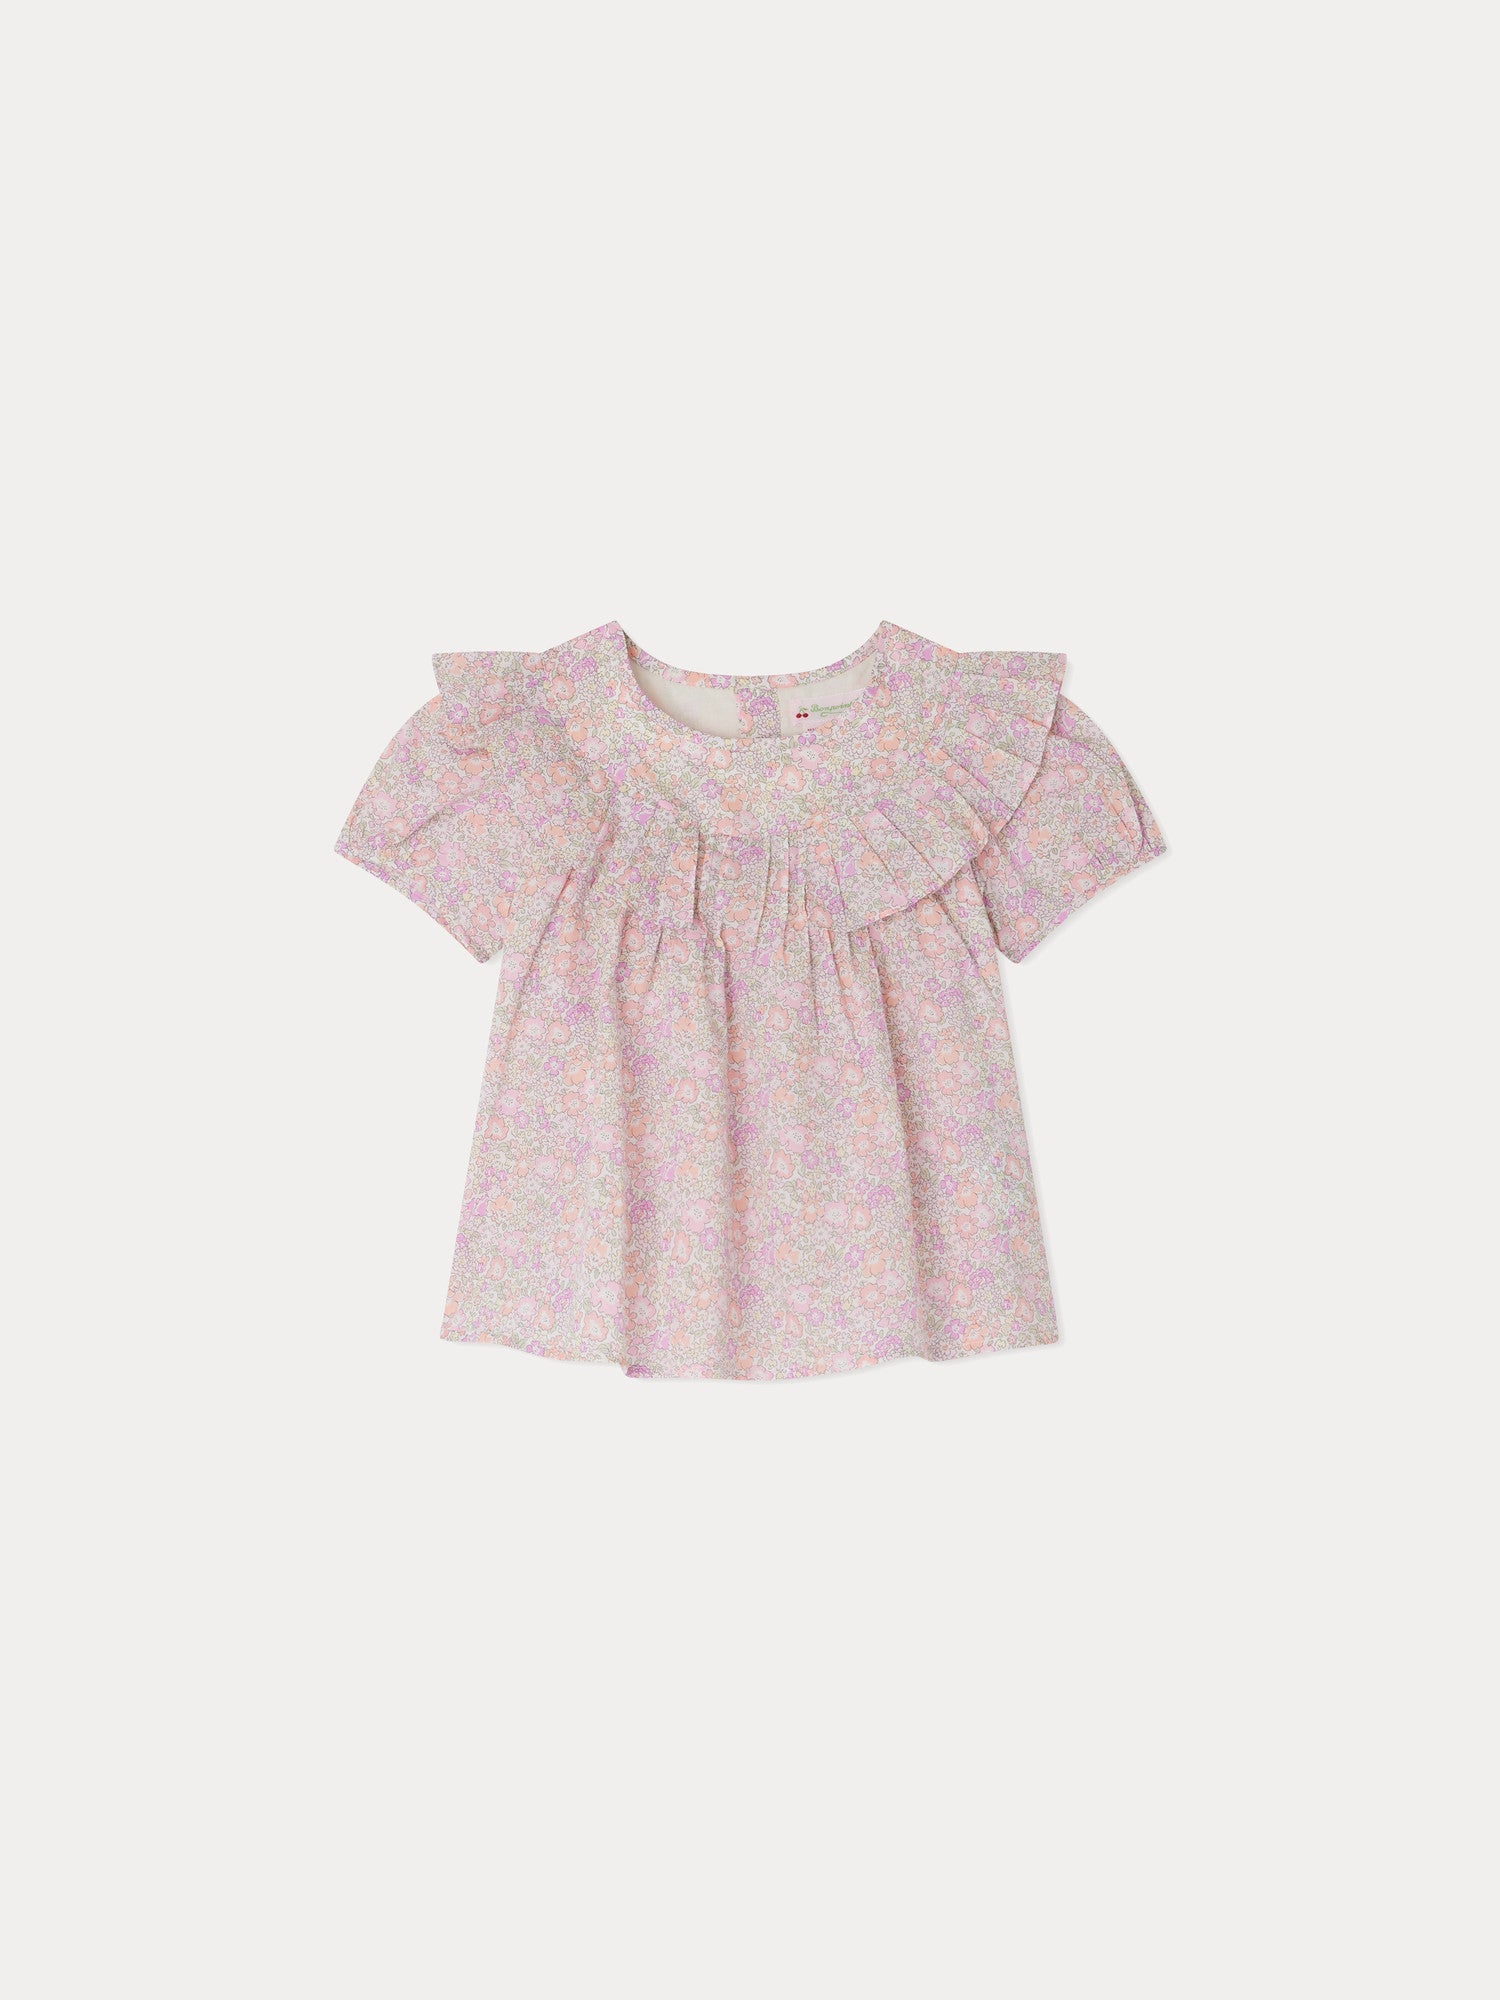 Girls Pink Floral Cotton Top